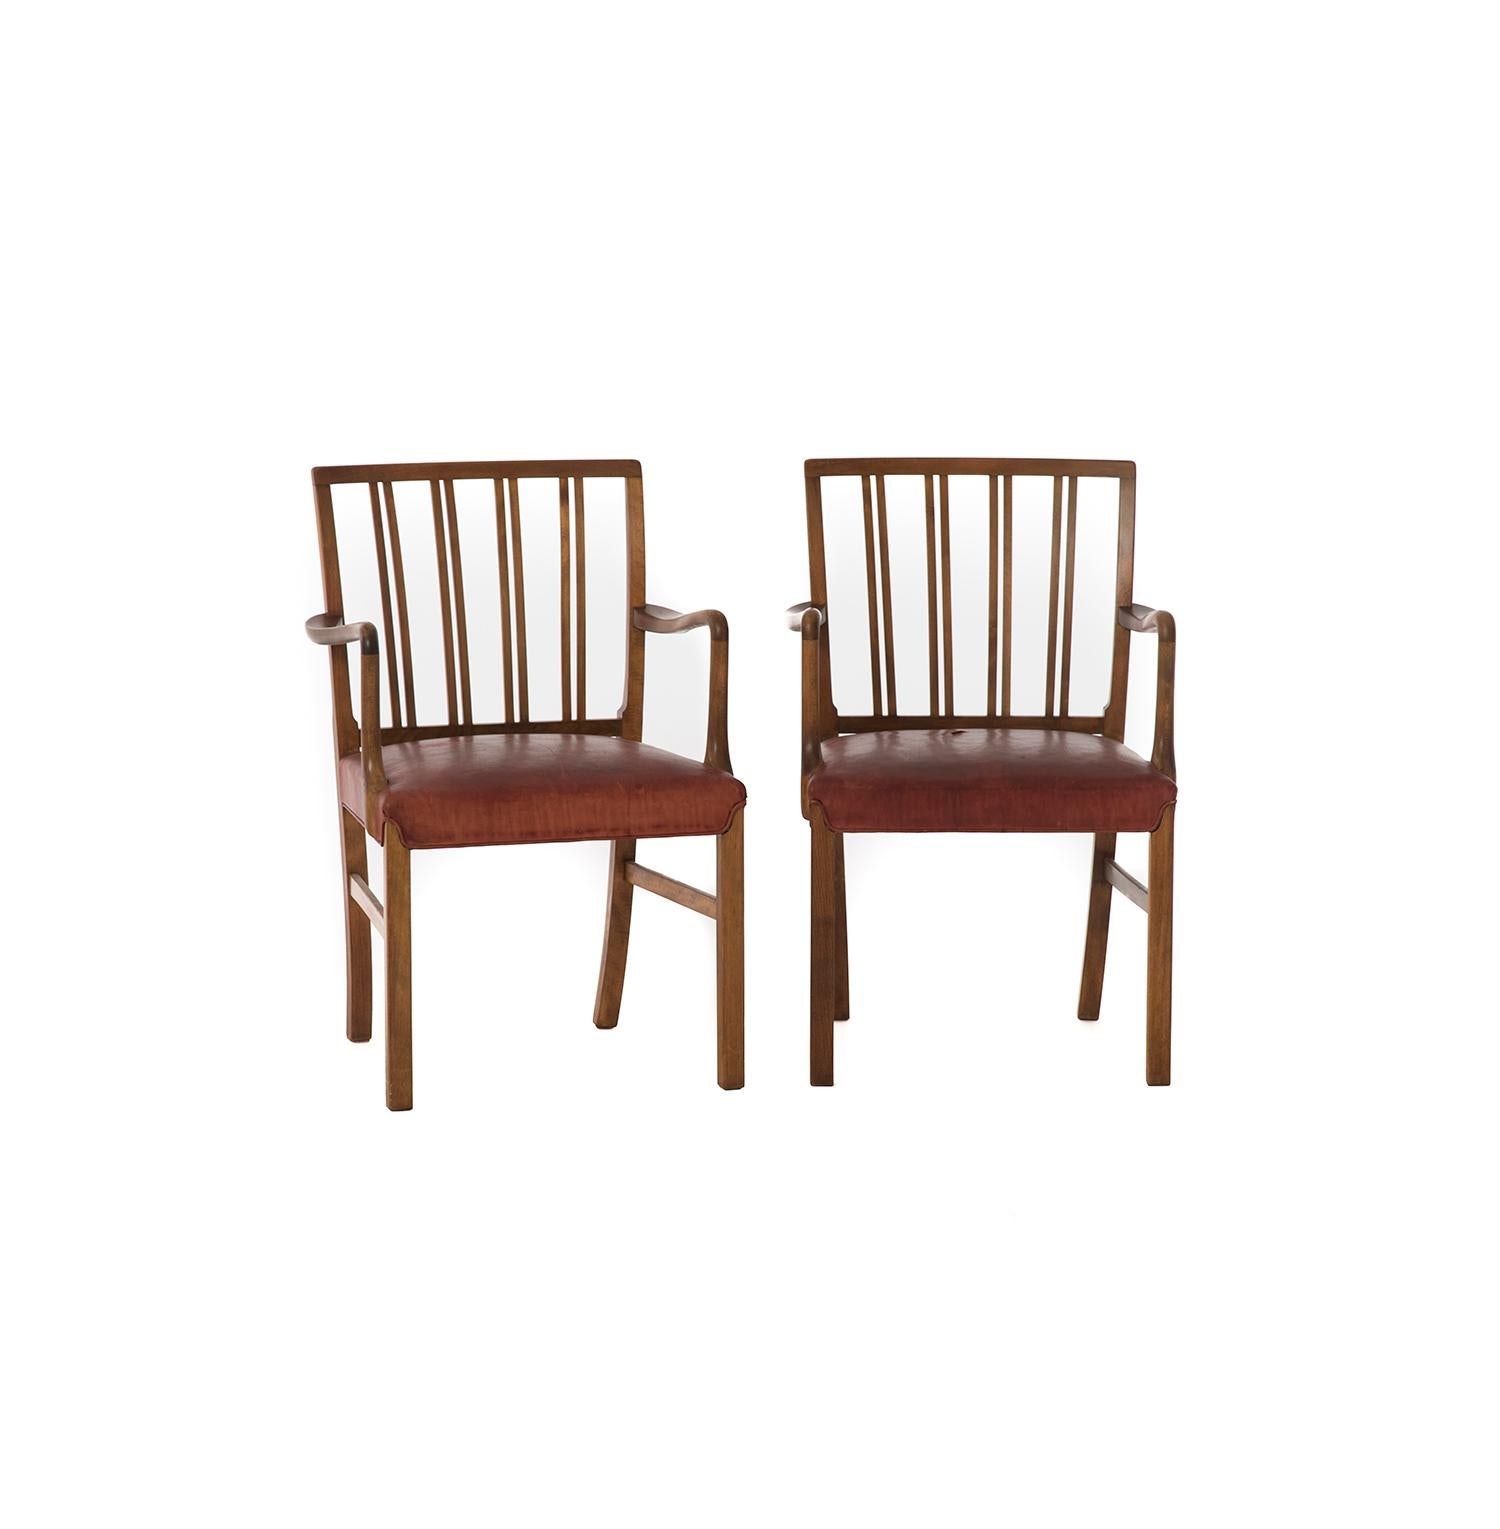 Transitional Danish Modern Occasional Chair by Ole Wanscher 1